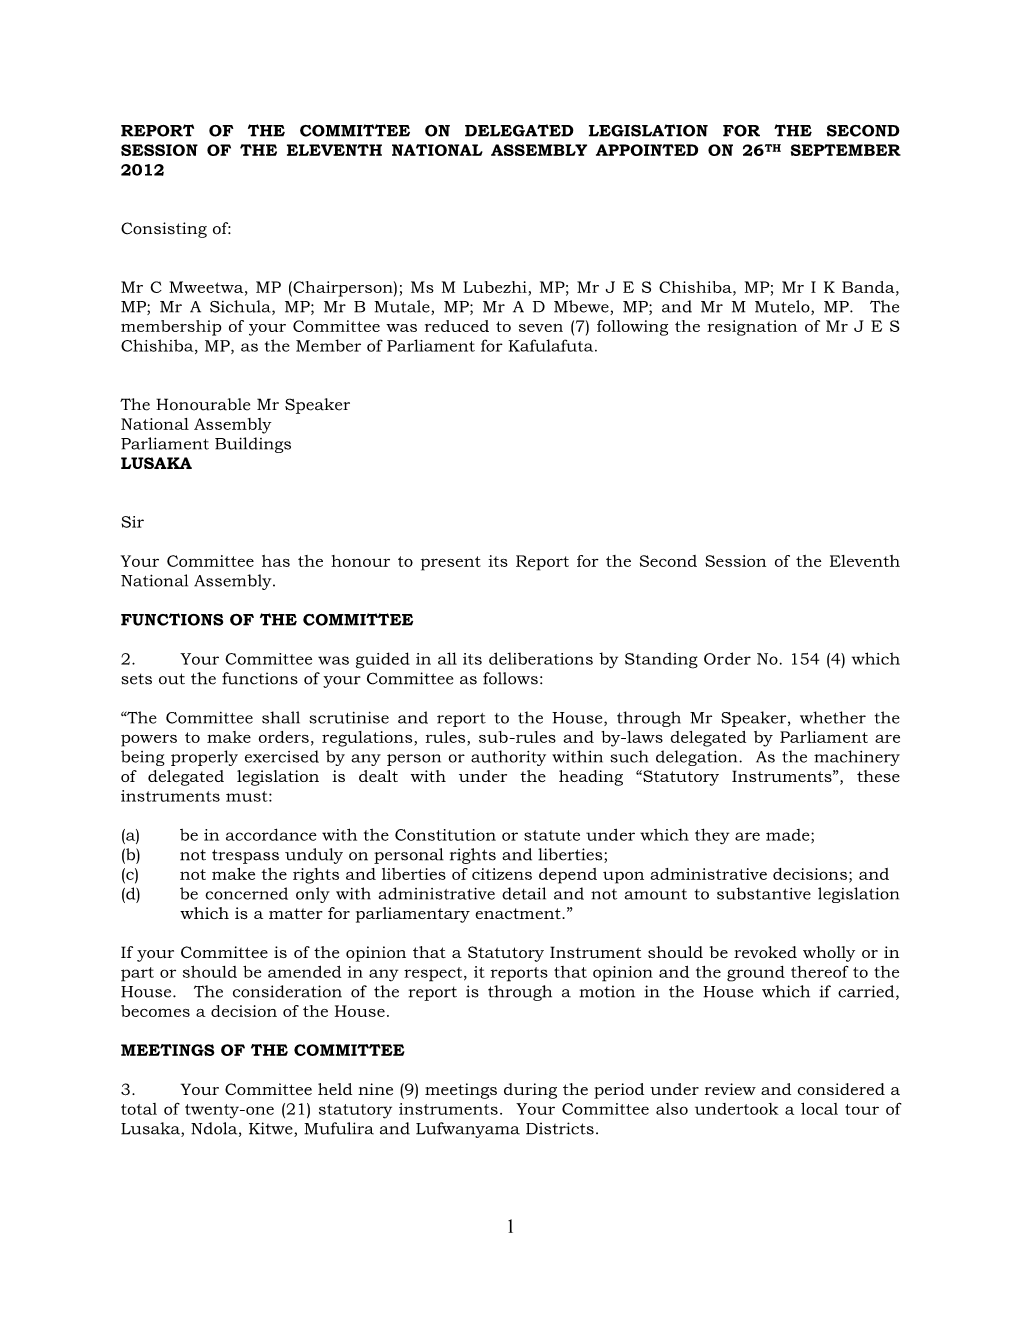 Report of the Committee on Delegated Legislation for the Second Session of the Eleventh National Assembly Appointed on 26Th September 2012